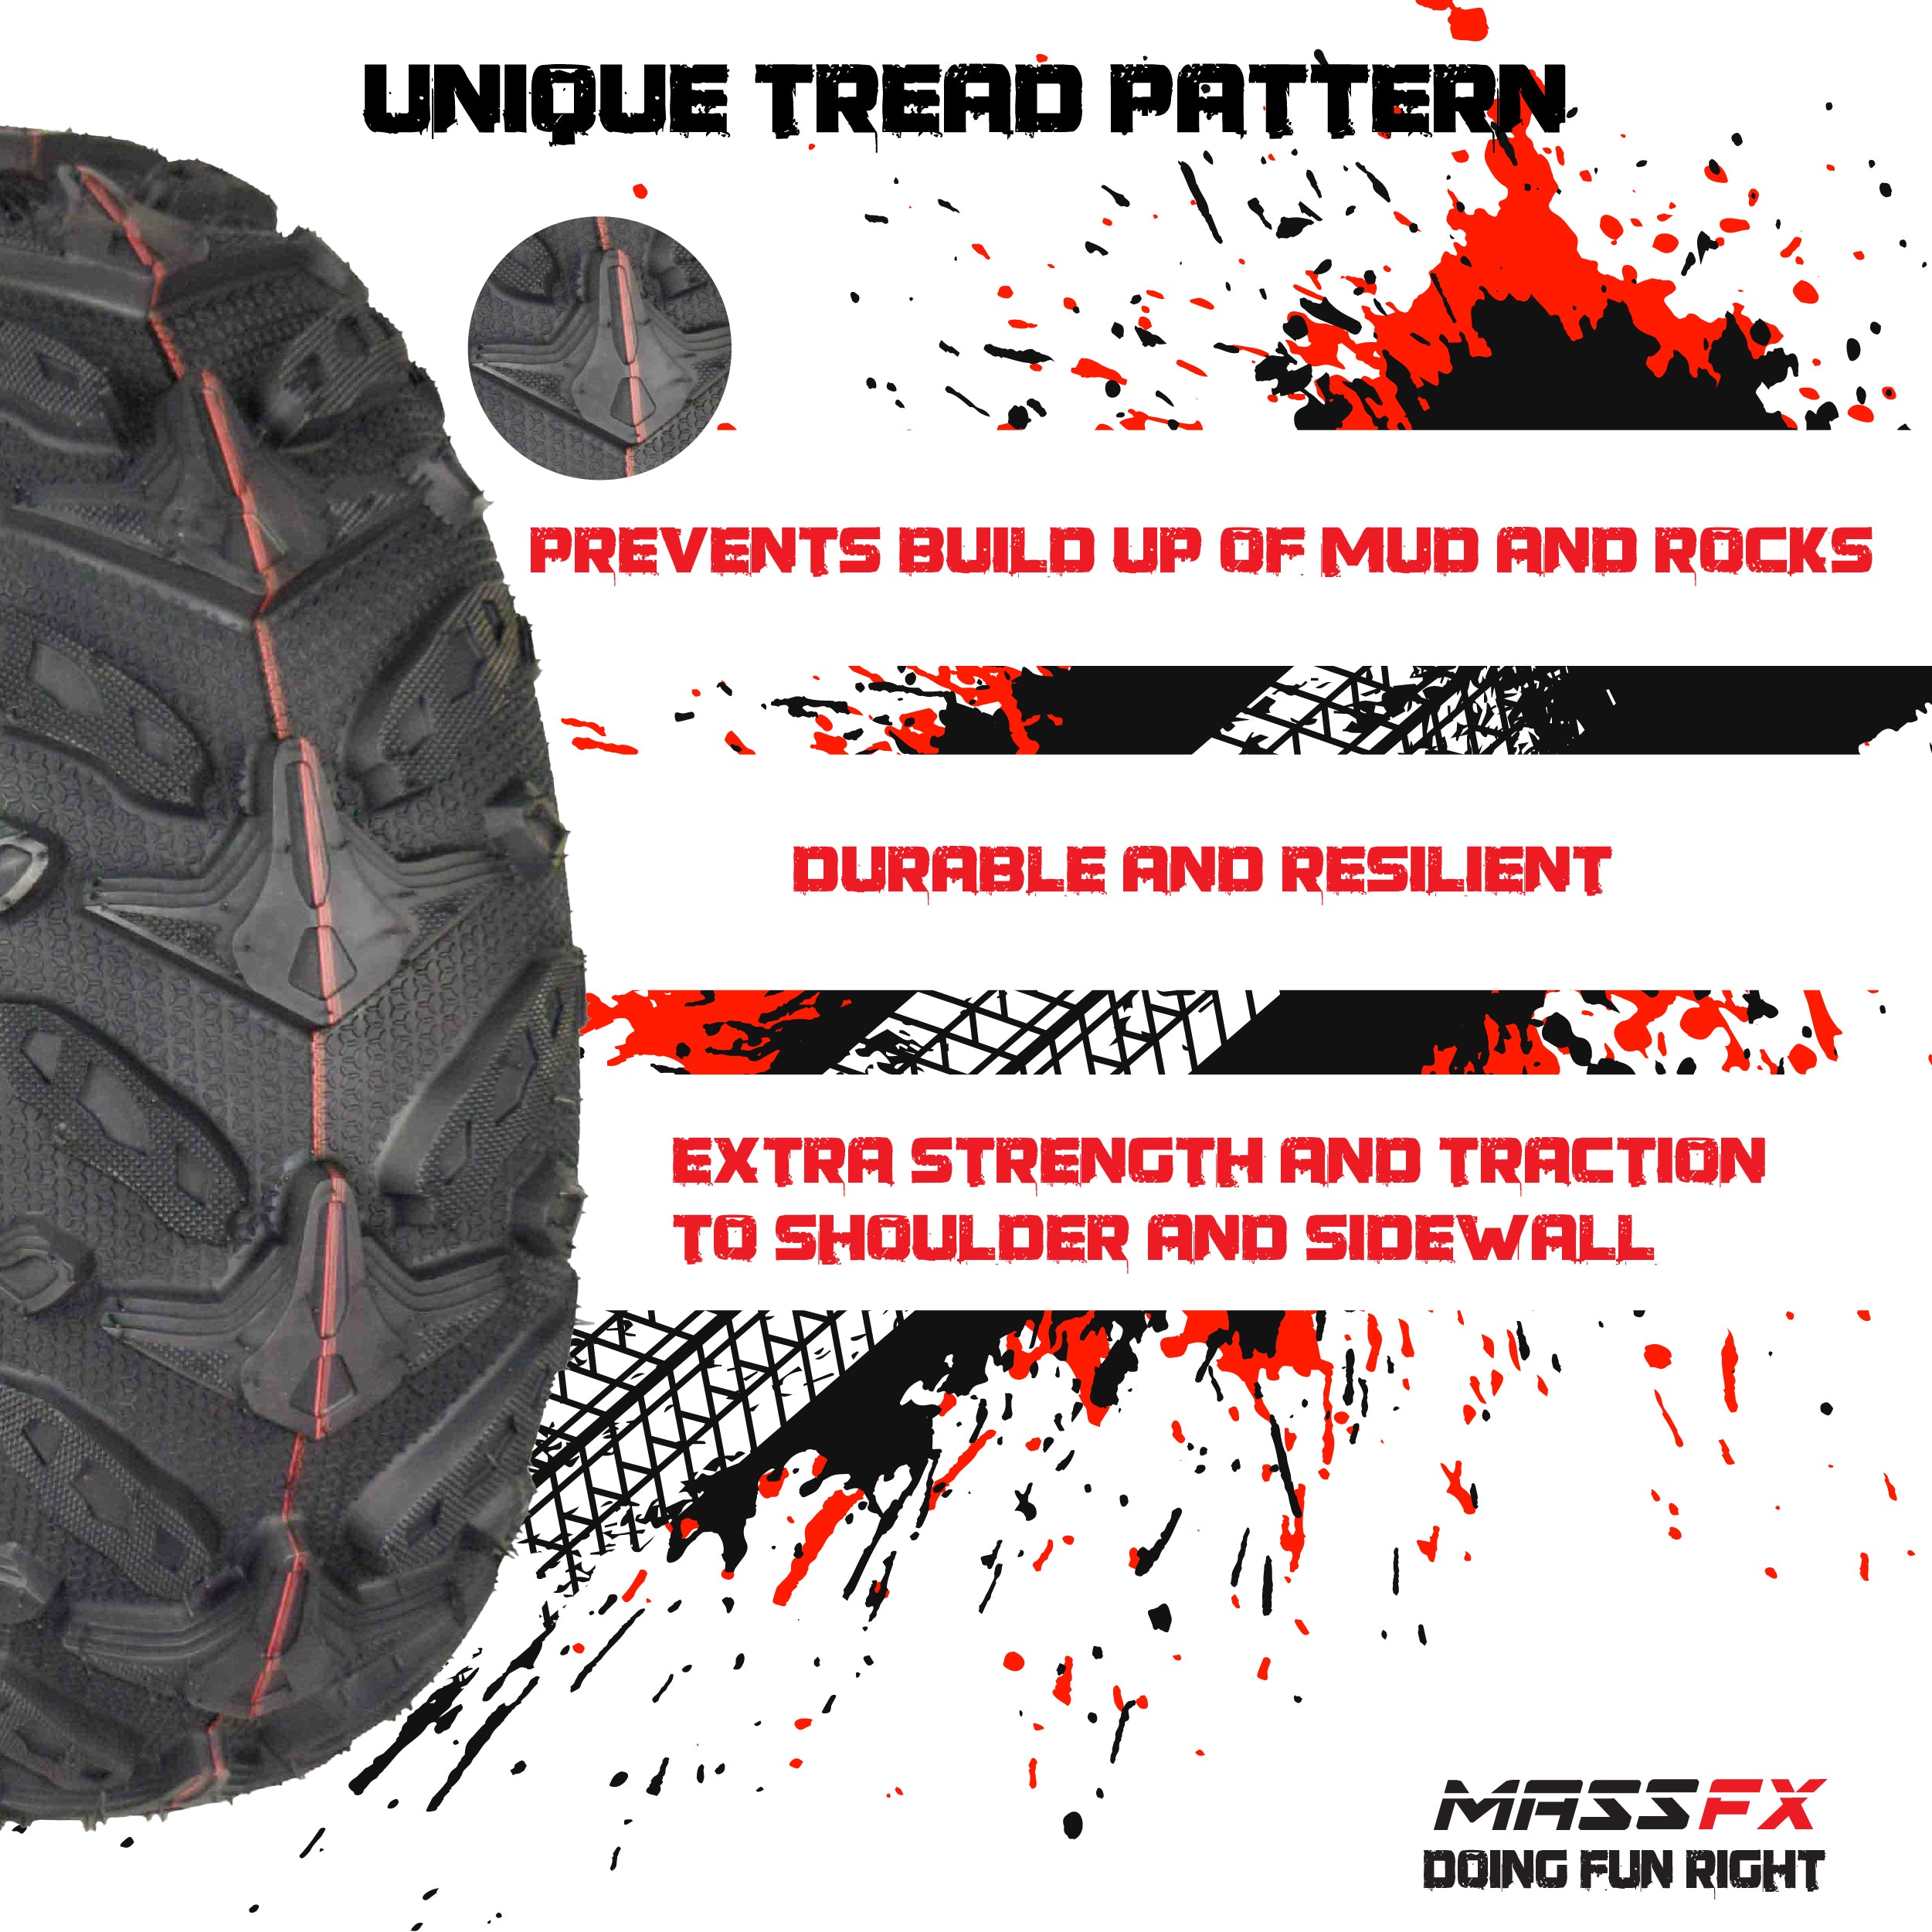 MASSFX Grinder 22x7-11 Front ATV Tire 6 Ply for Soft/Hard Pack Ground